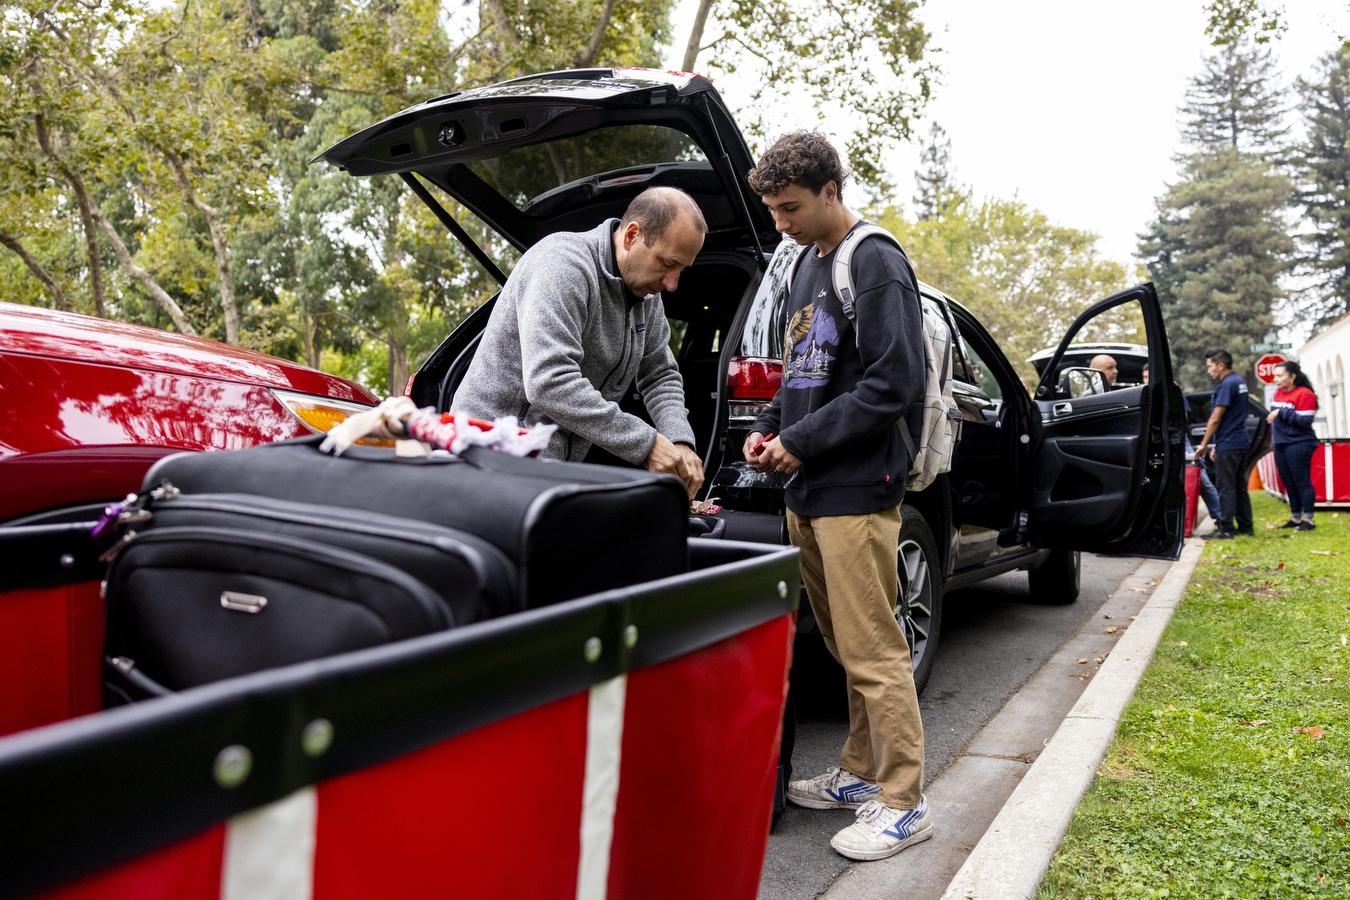 A father helps his sone unload a suitcase and belongings form the back of a black SUV